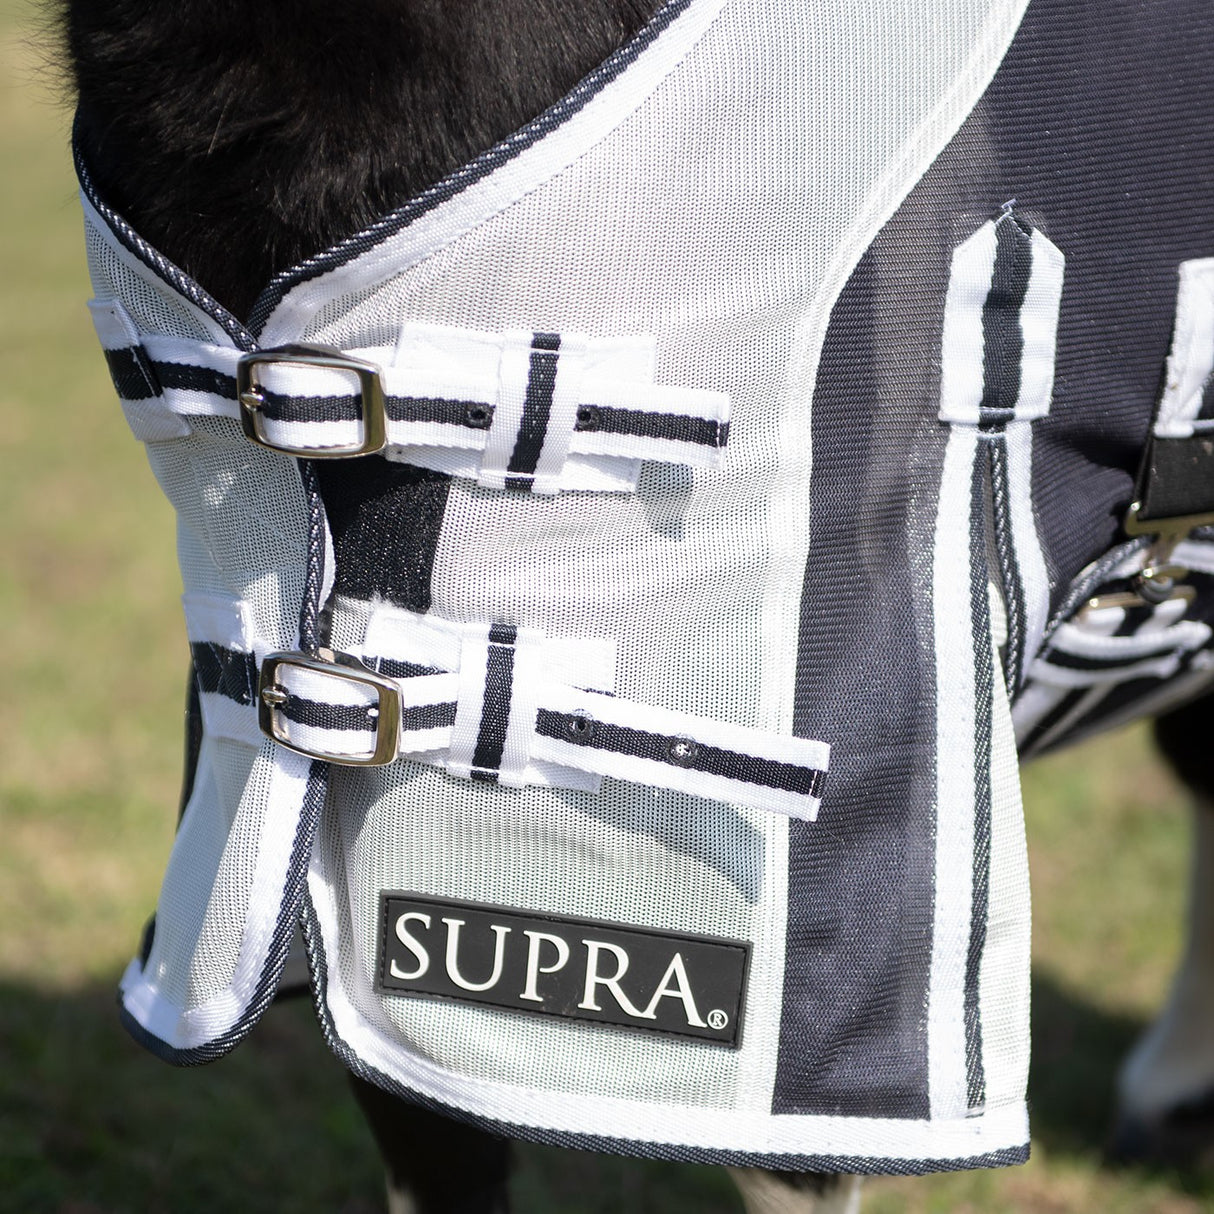 Supra Miniature Fly Sheet W/ Belly Band & Fly Mask